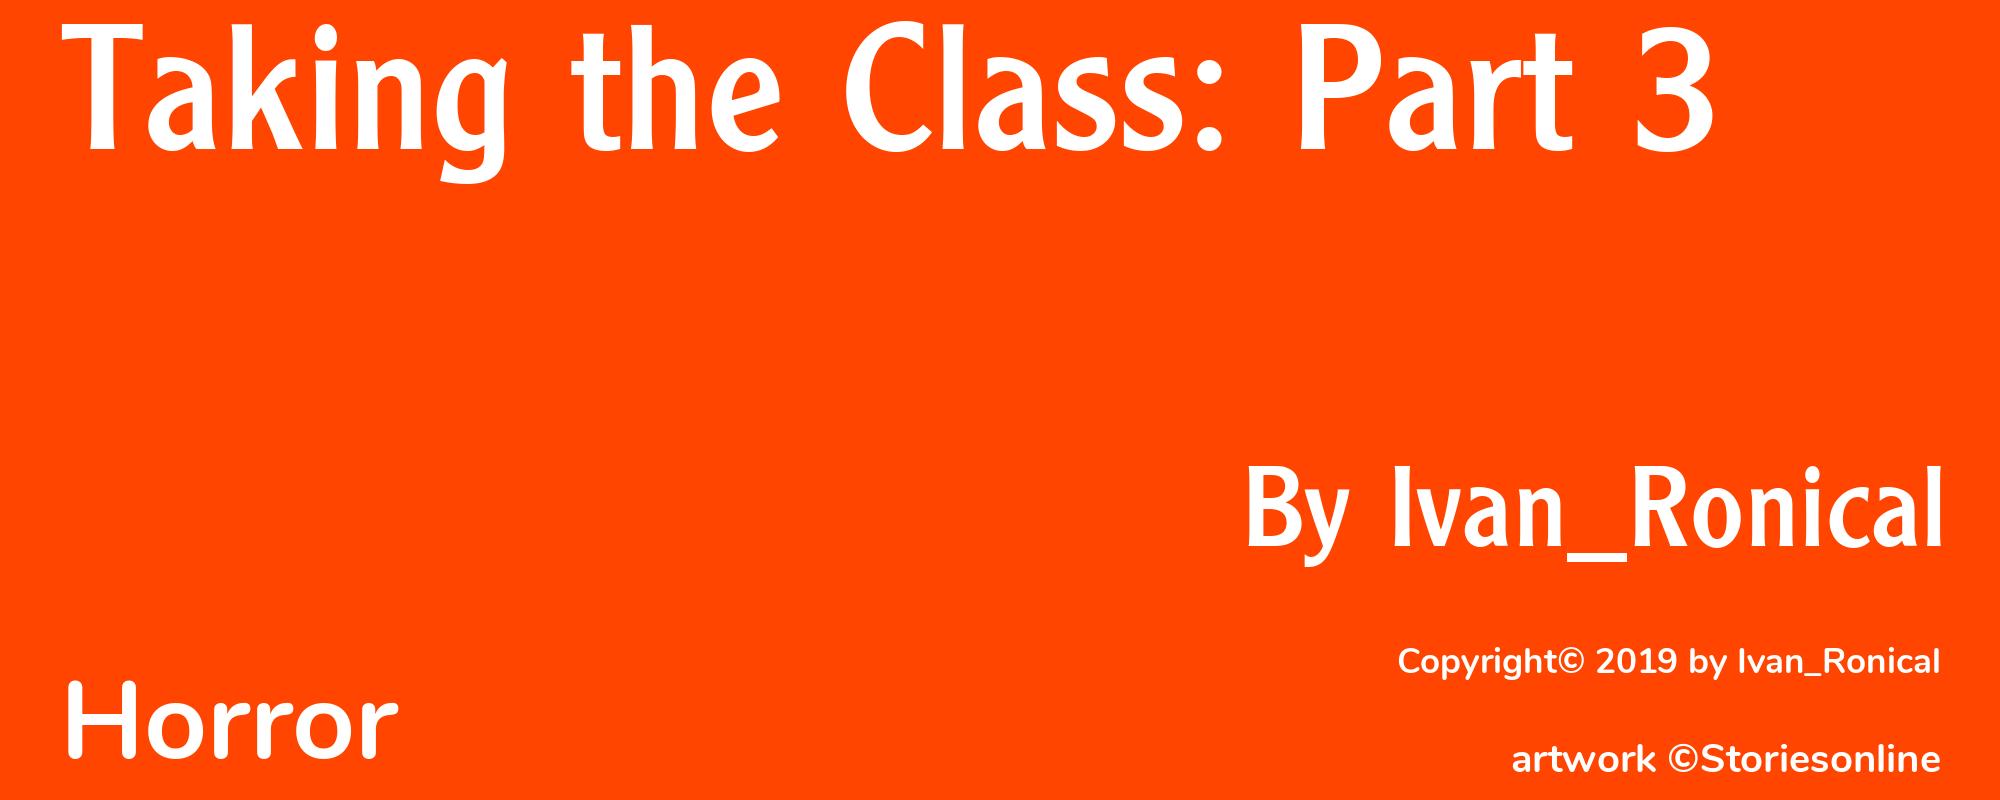 Taking the Class: Part 3 - Cover